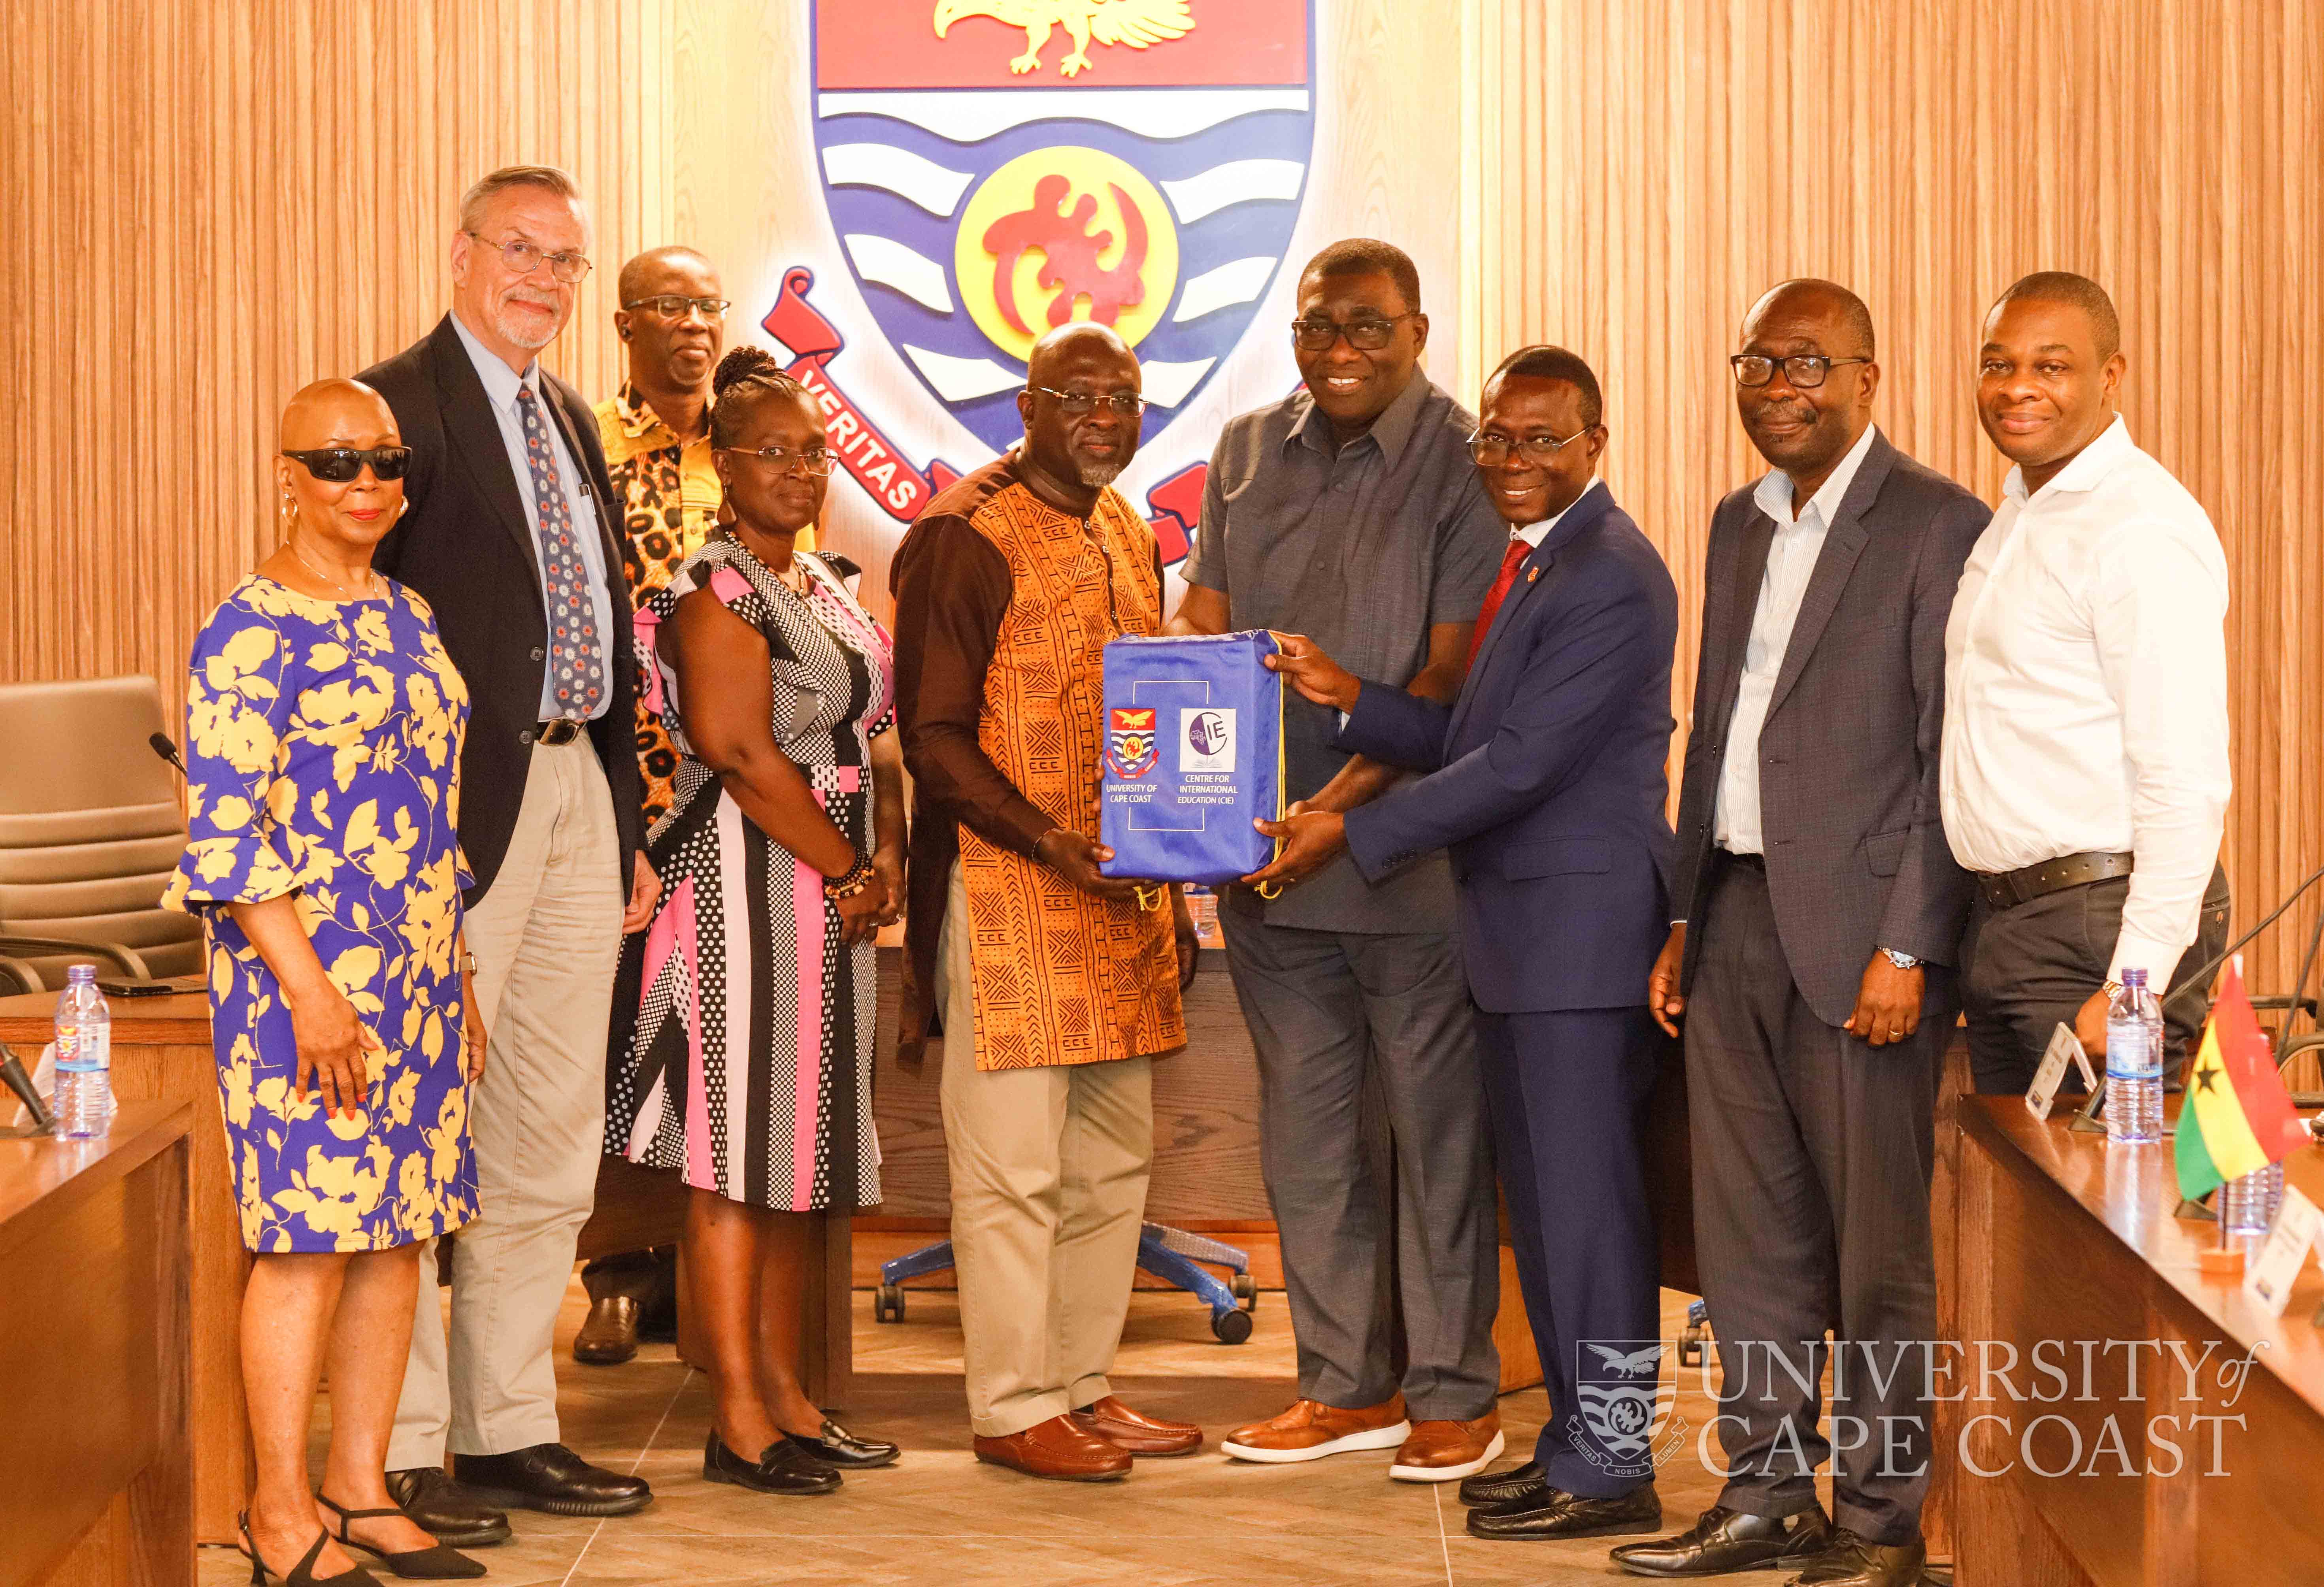 The delegation from MSM presenting a gift to the Vice-Chancellor